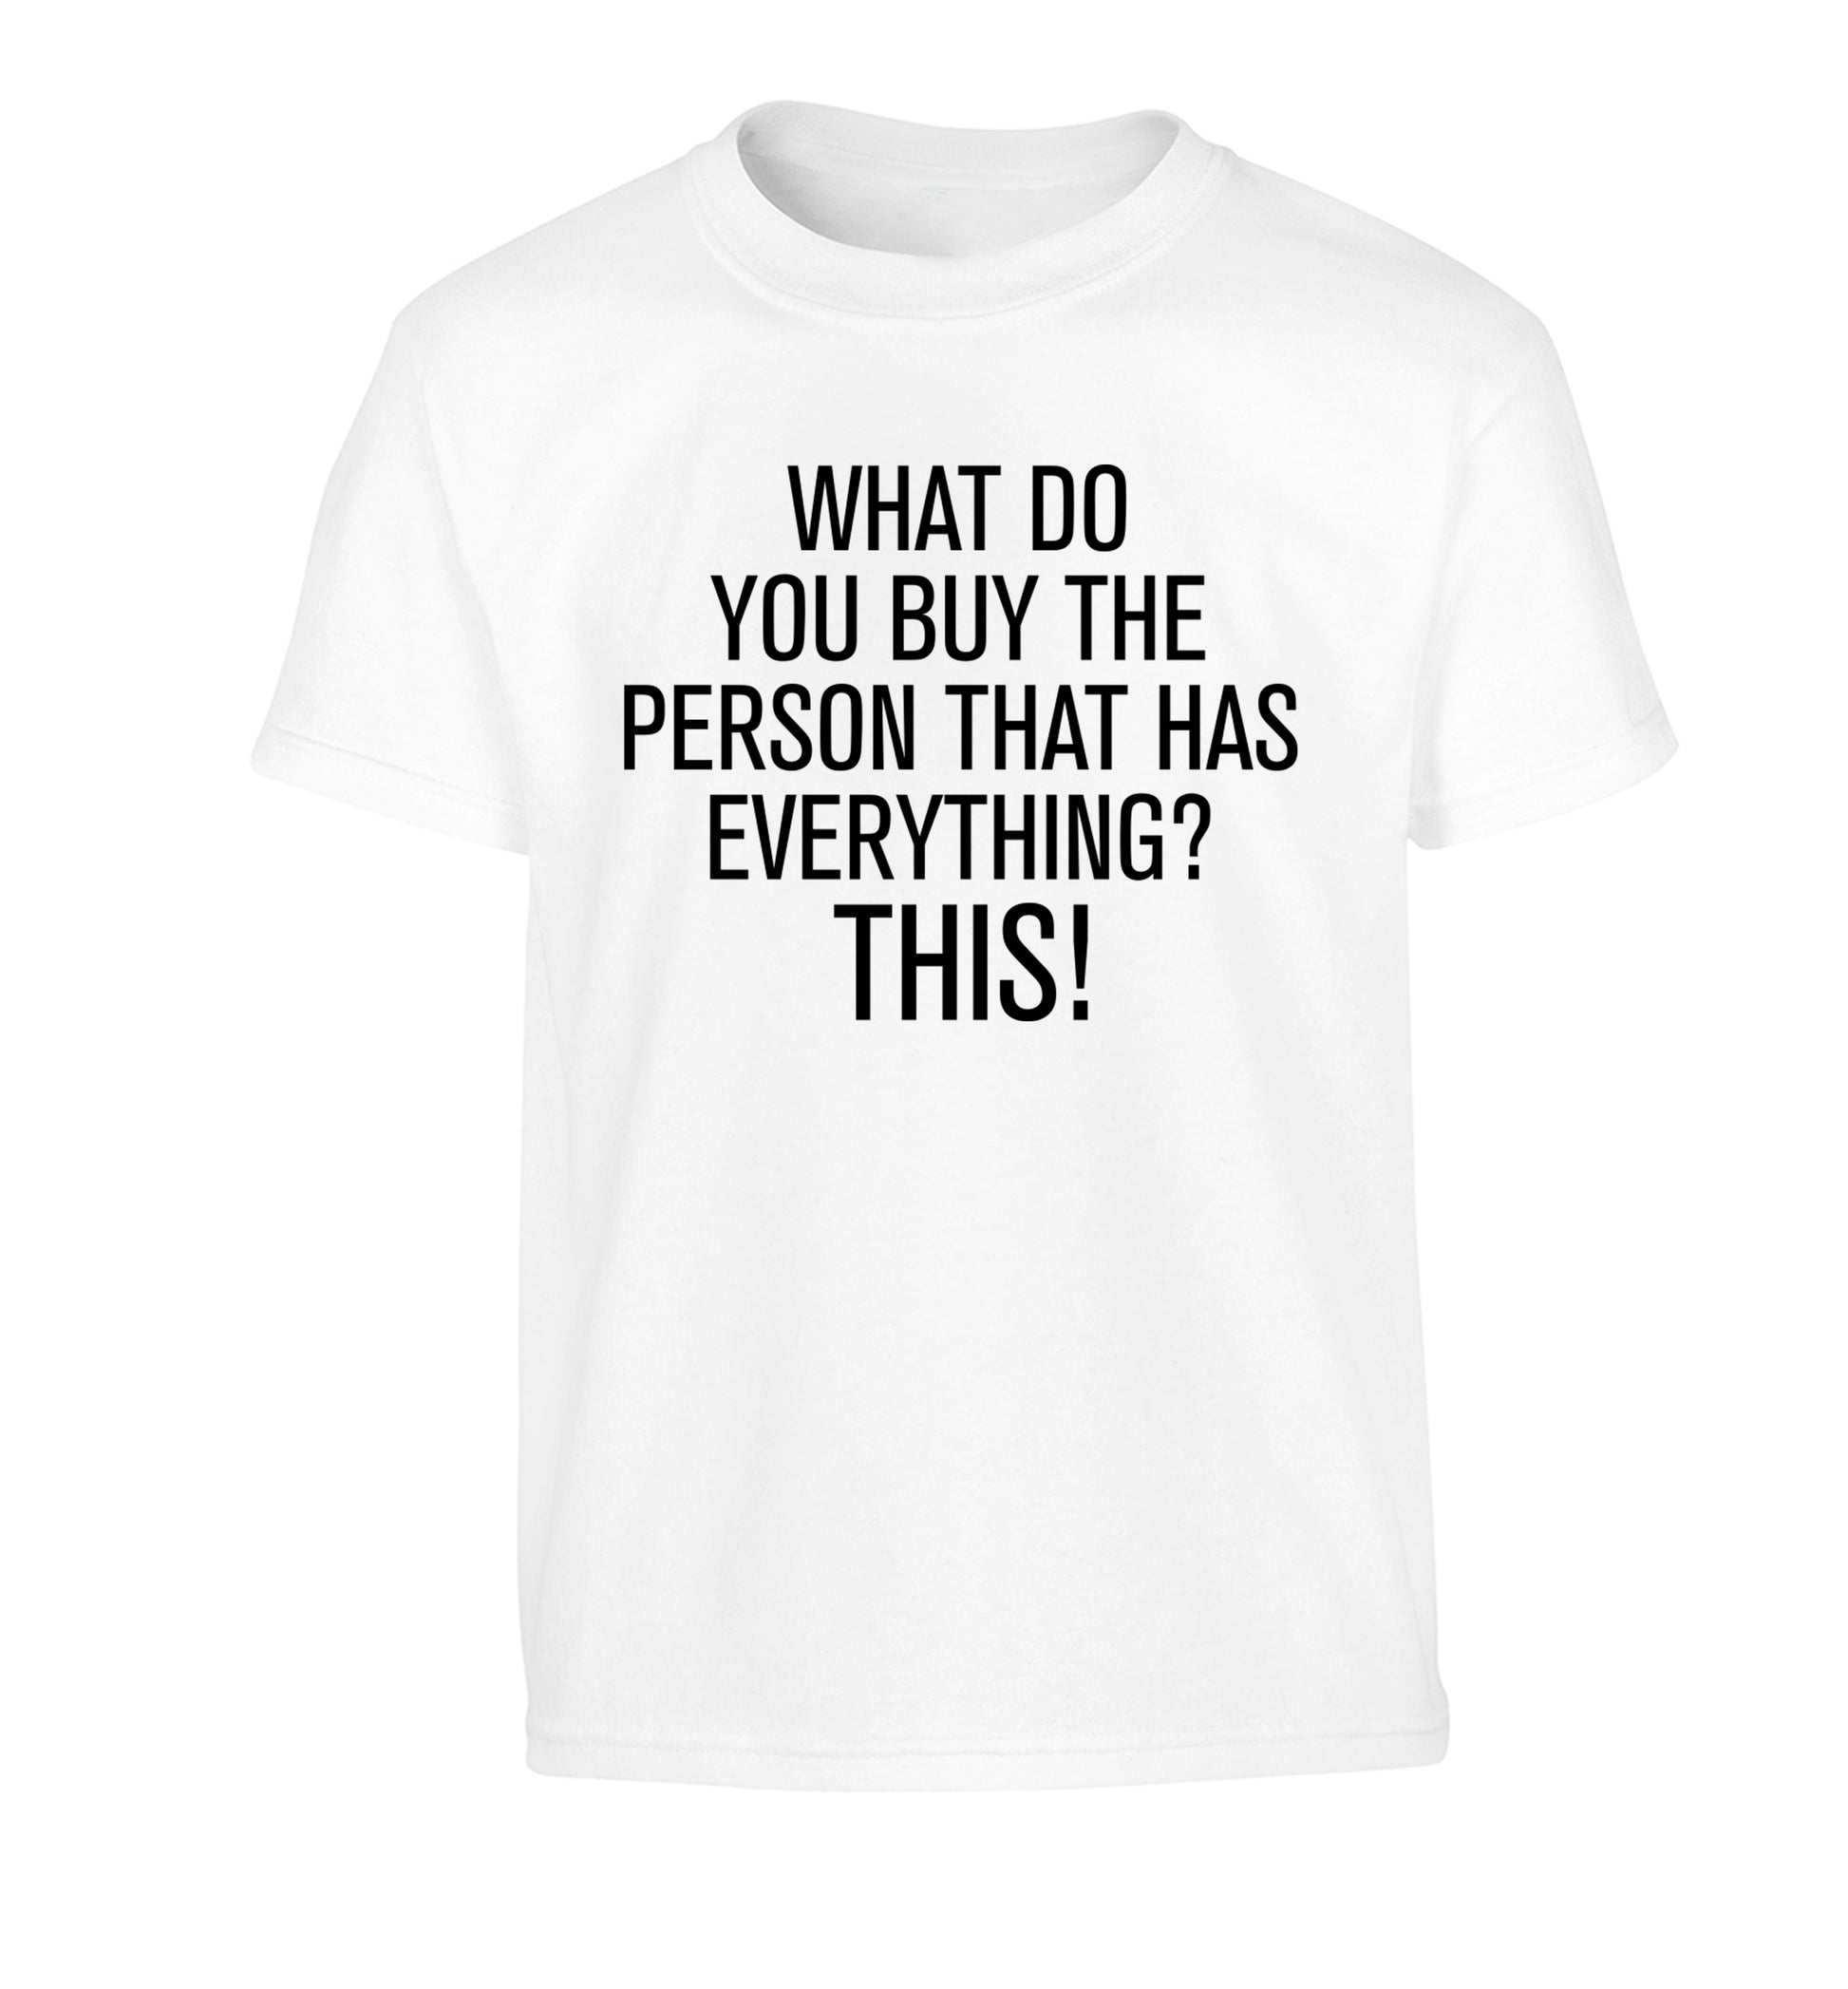 What do you buy the person that has everything? This! Children's white Tshirt 12-13 Years